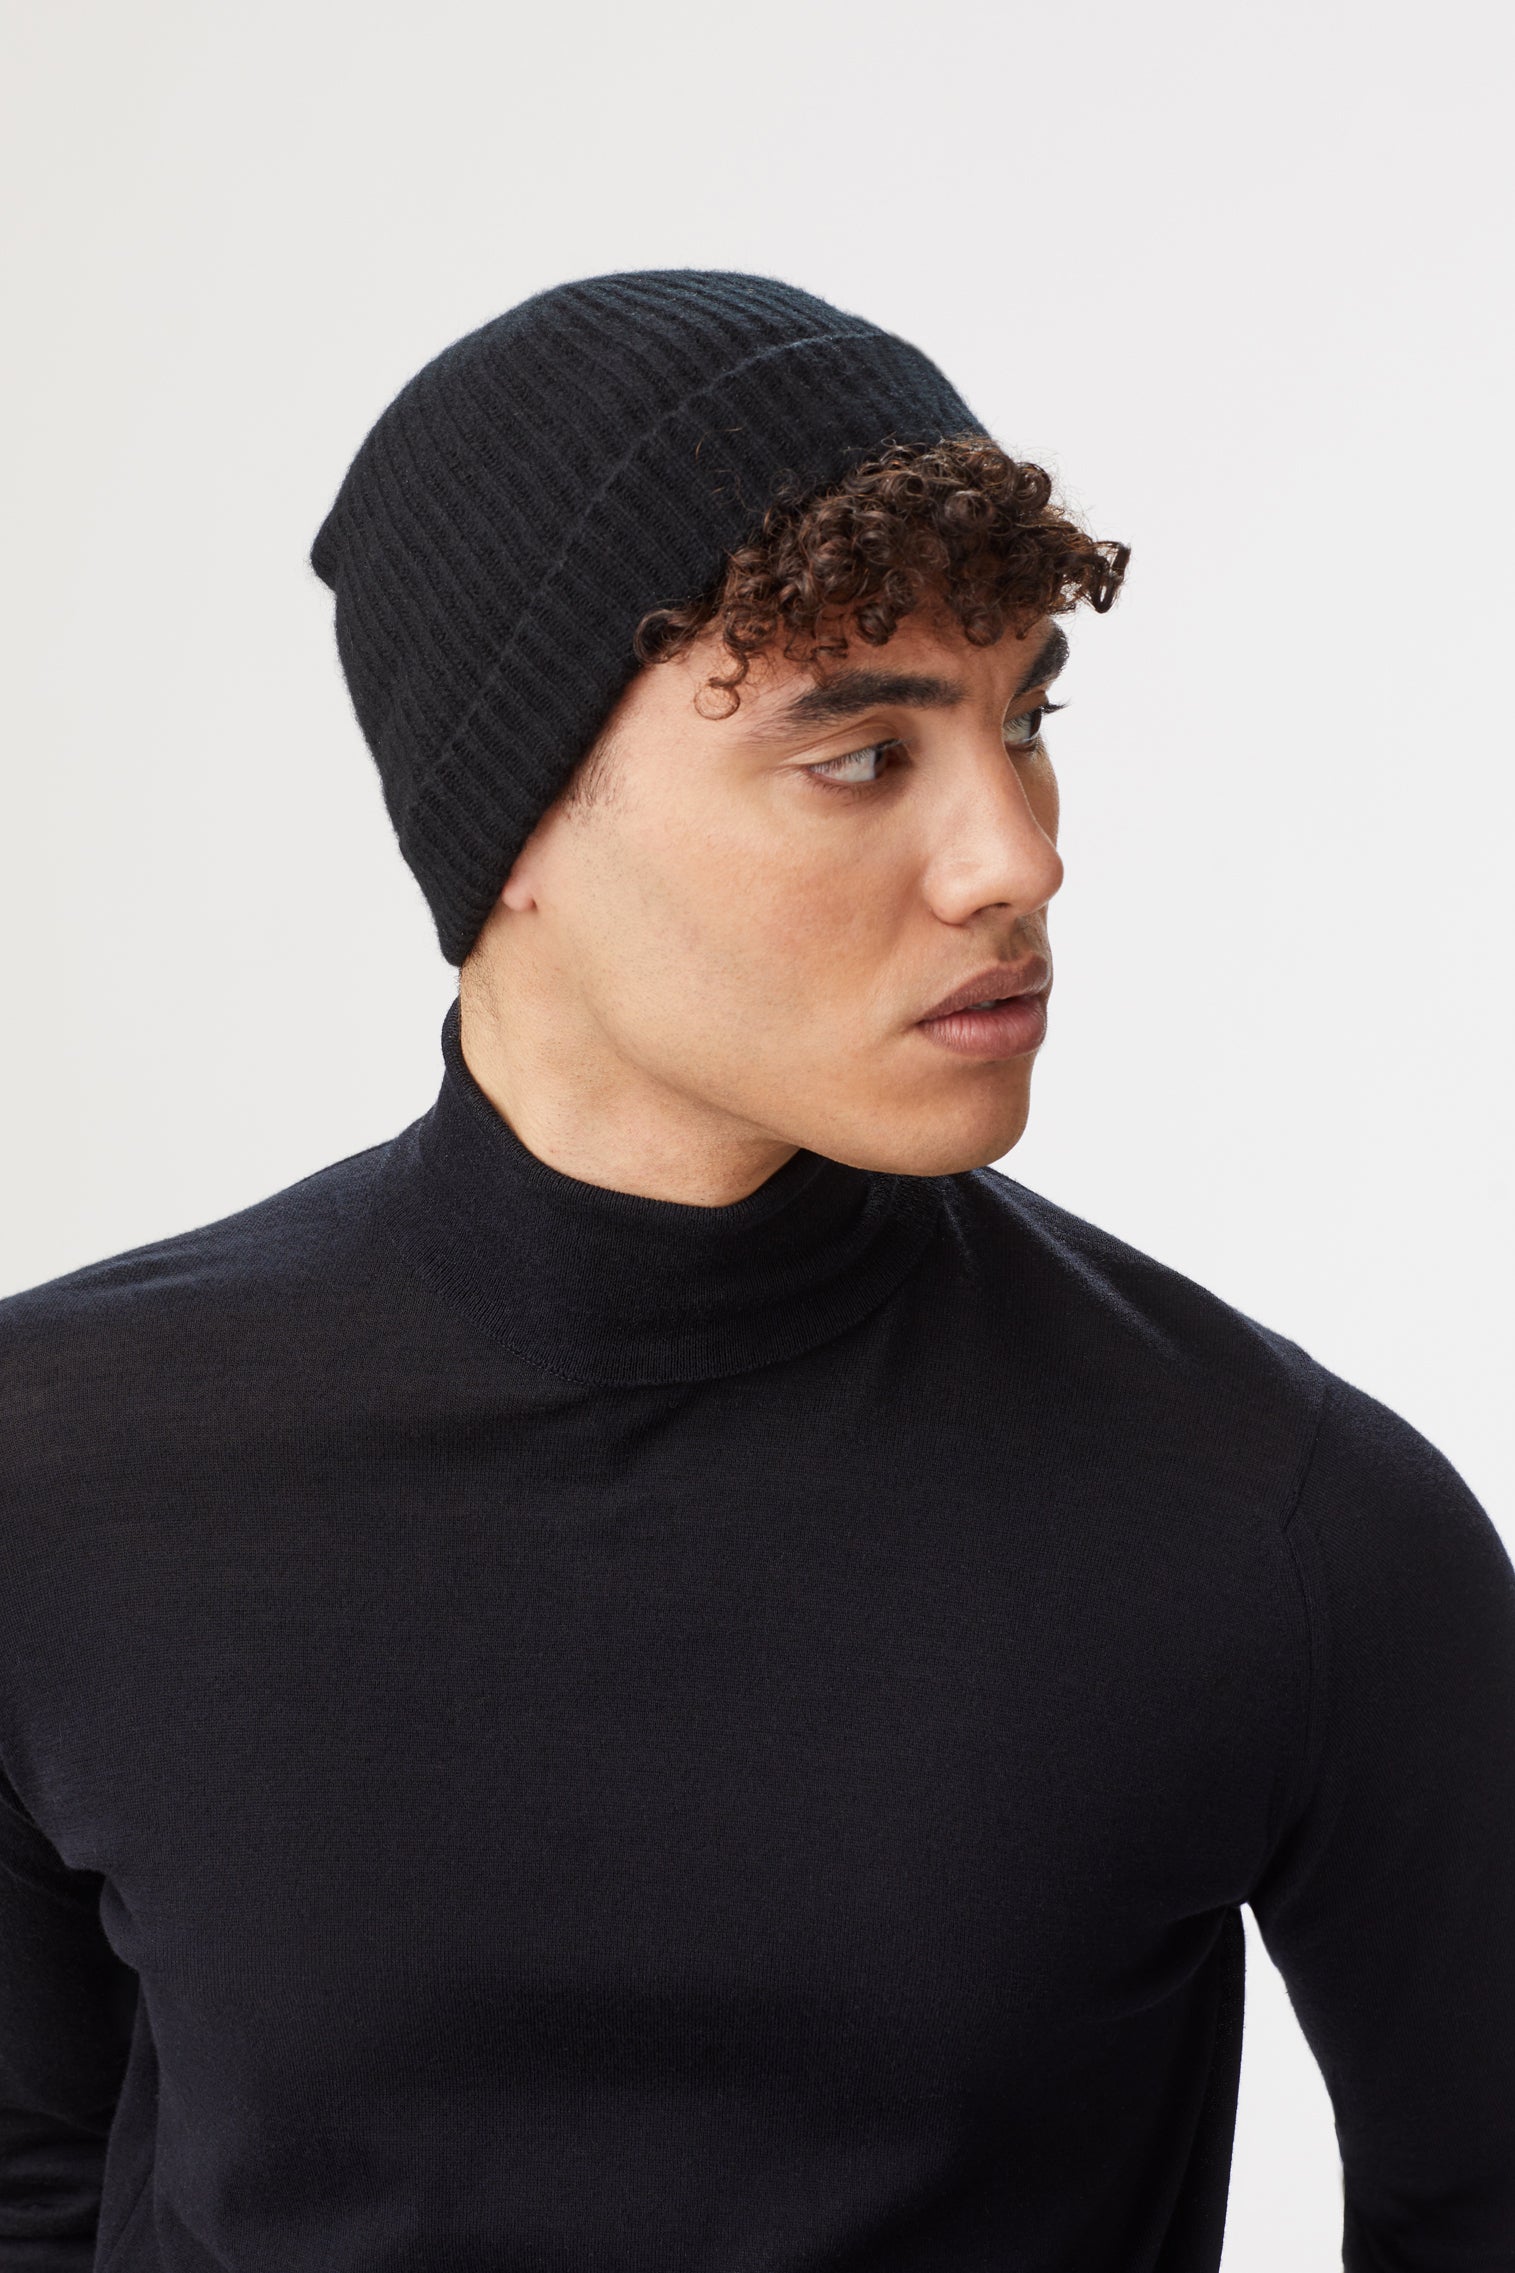 Black Cashmere Ski Beanie - Hats for Oval Face Shapes - Lock & Co. Hatters London UK